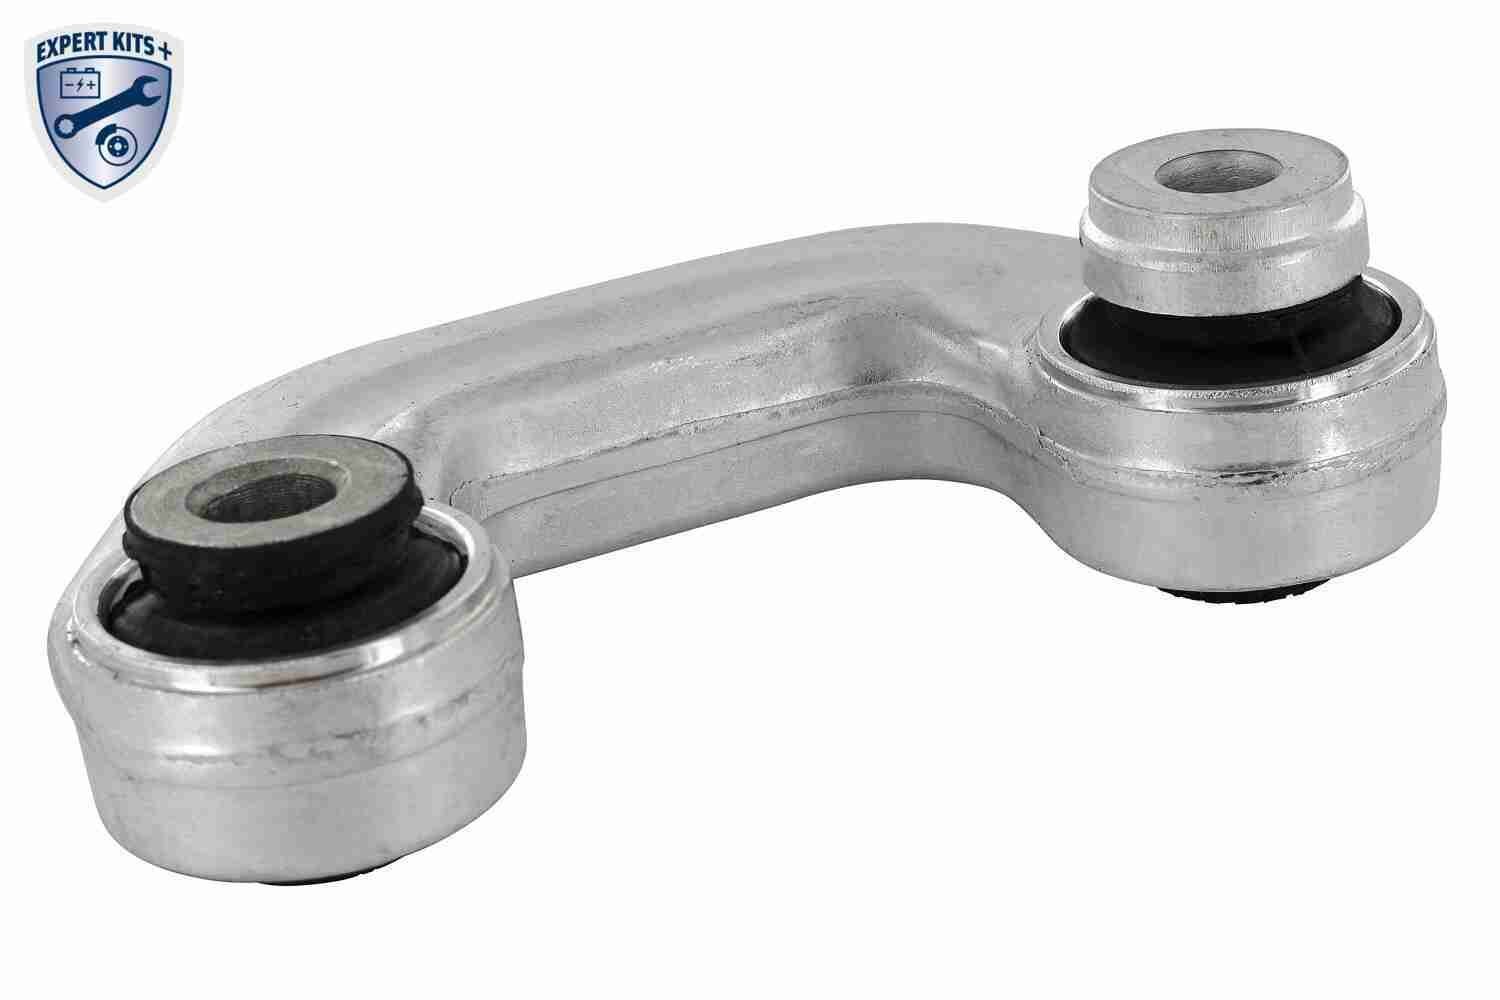 V10-7205 Trailing arm V10-7205 VAICO Front Axle, with attachment material, with suspension rod, EXPERT KITS +